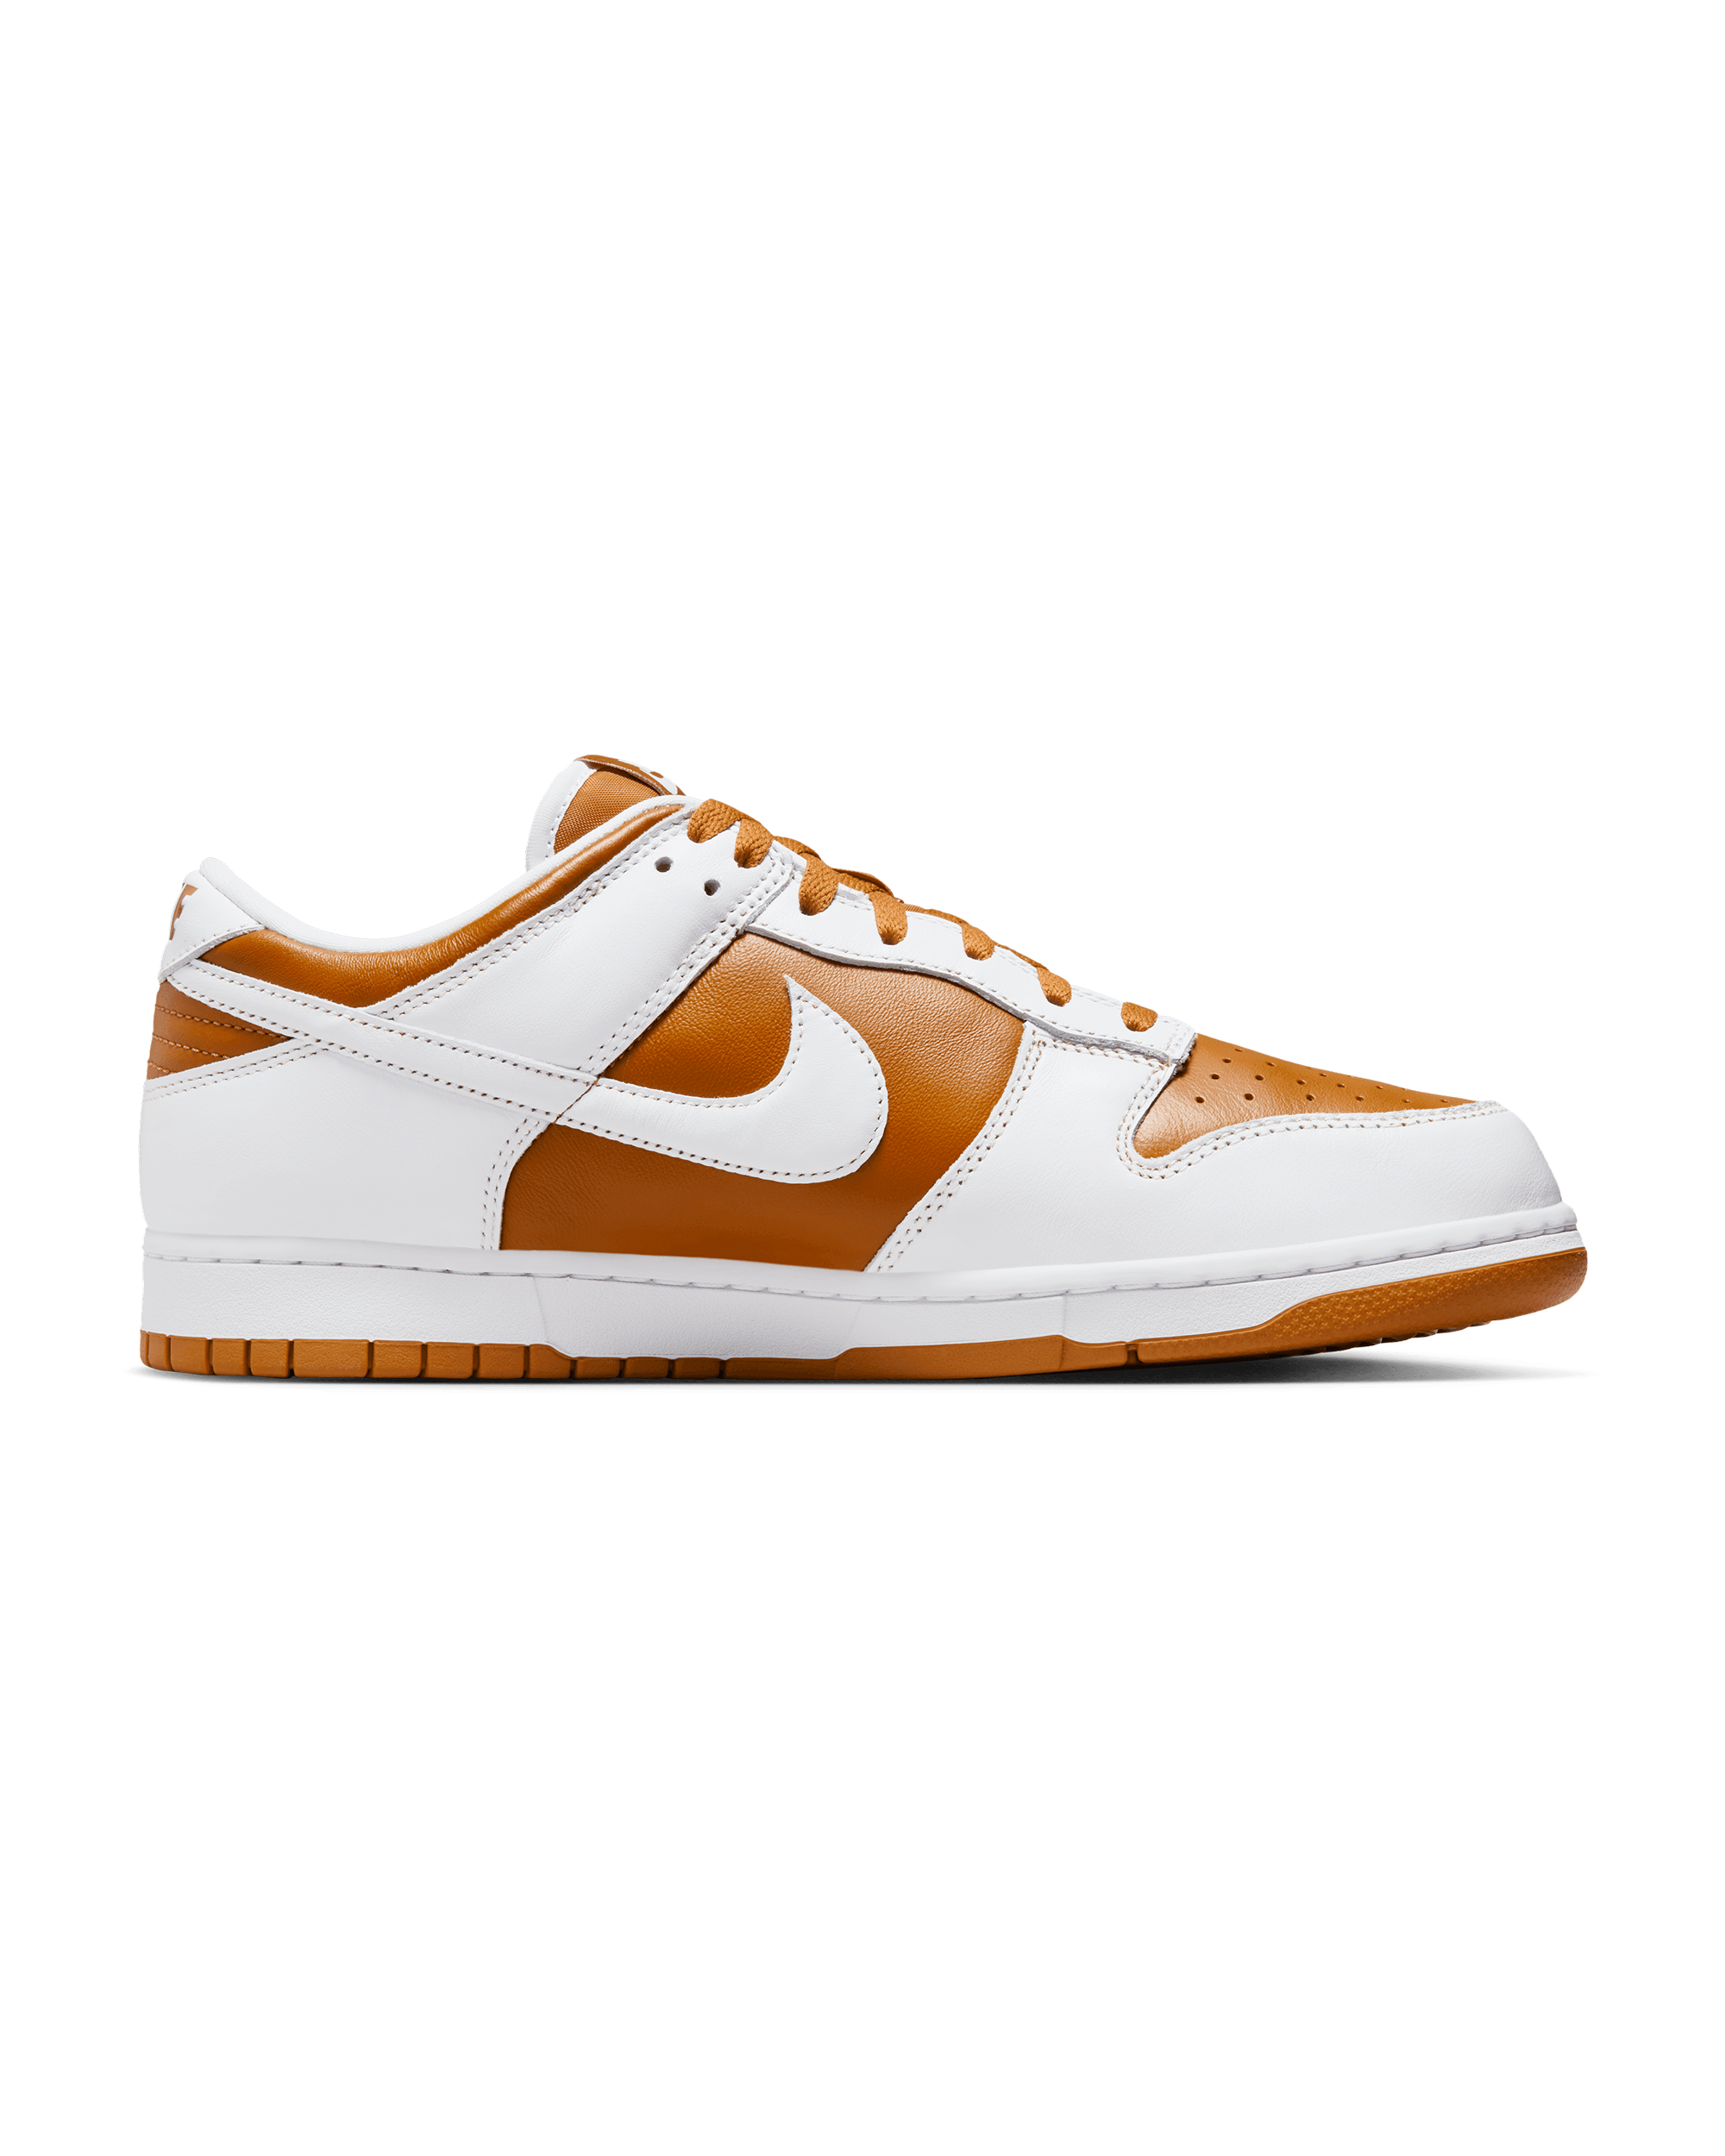 Dunk Low "Reverse Curry" - Dark Curry / White